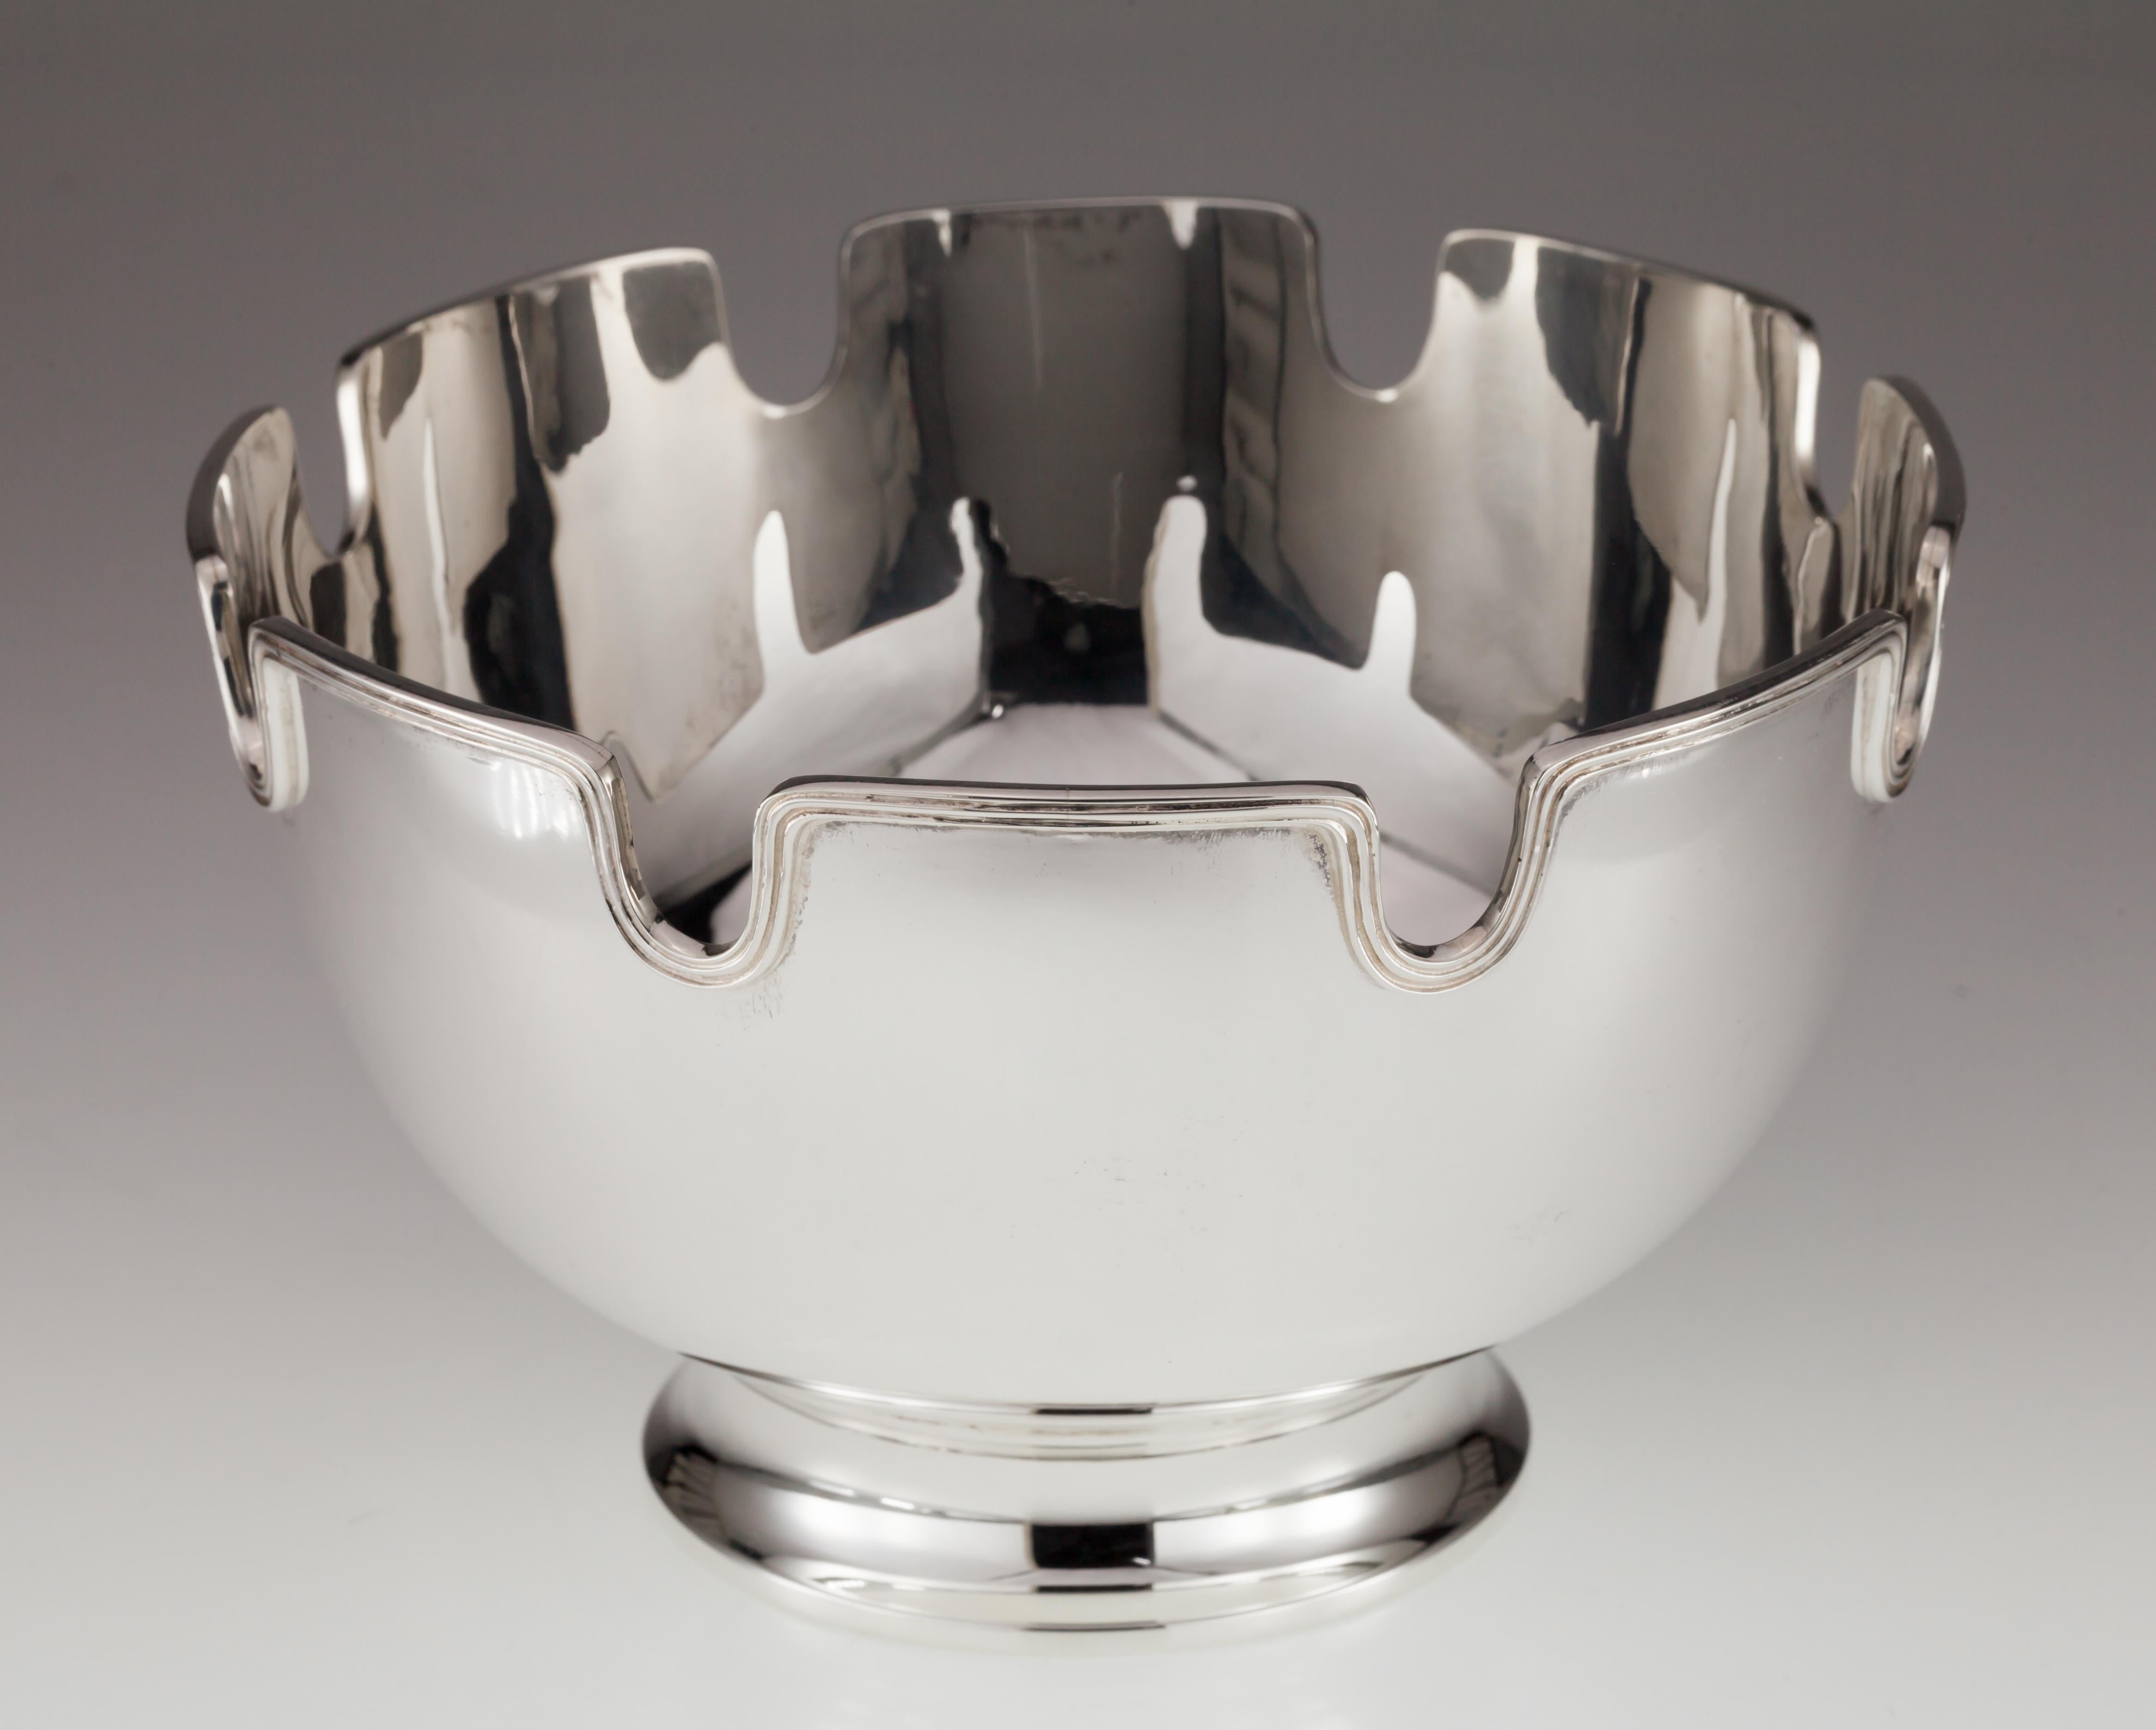 
Tiffany Makers Monteith Sterling Silver Toothed Bowl Gorgeous!

Beautiful Sterling Silver Bowl by Tiffany Makers
Serial #25156
Monteith Bowl
Diameter = 6.75